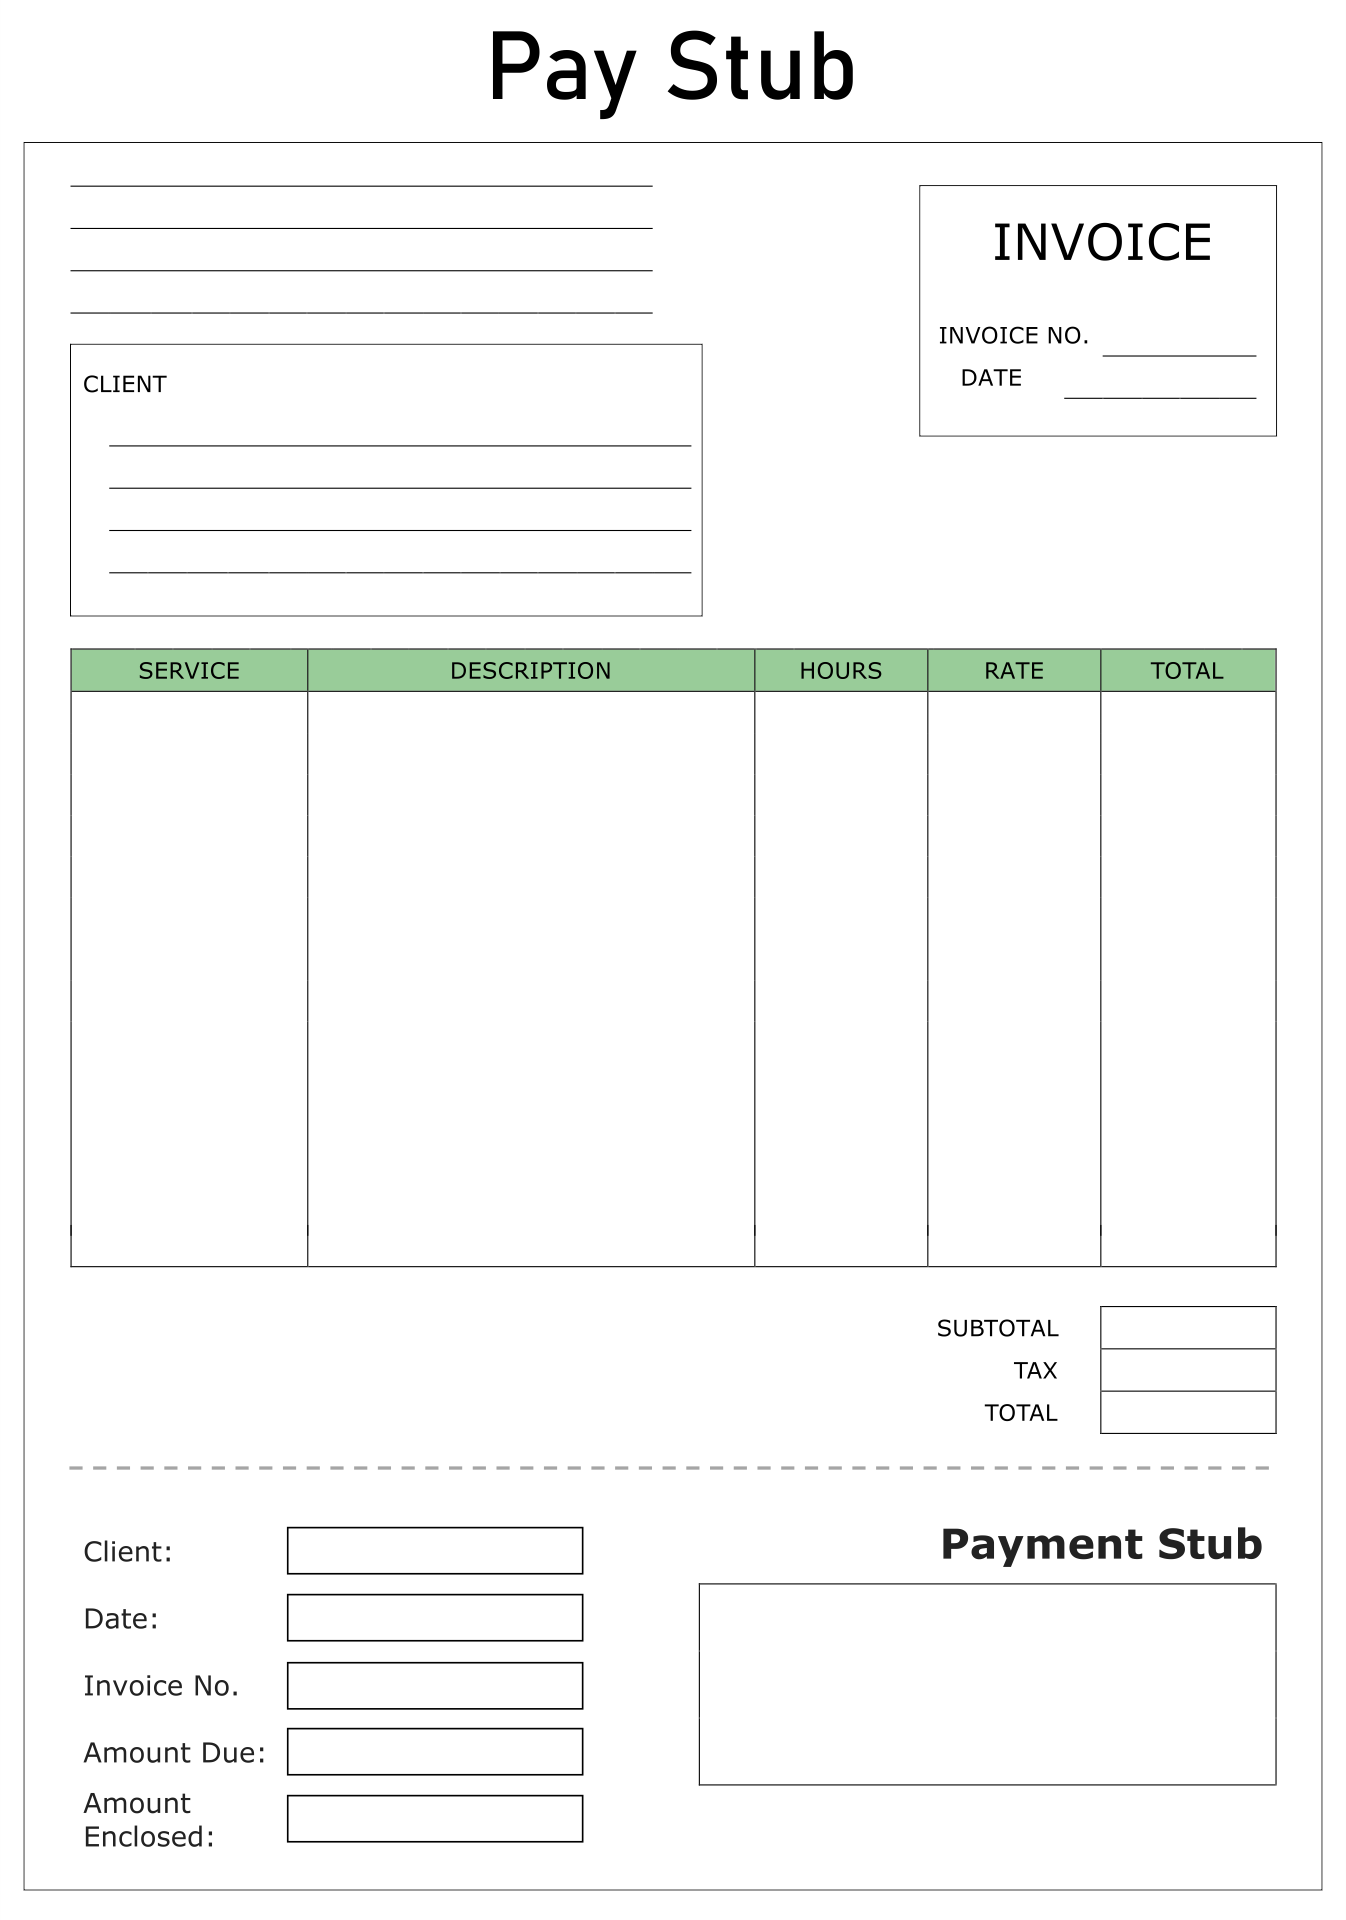 blank-pay-stubs-template